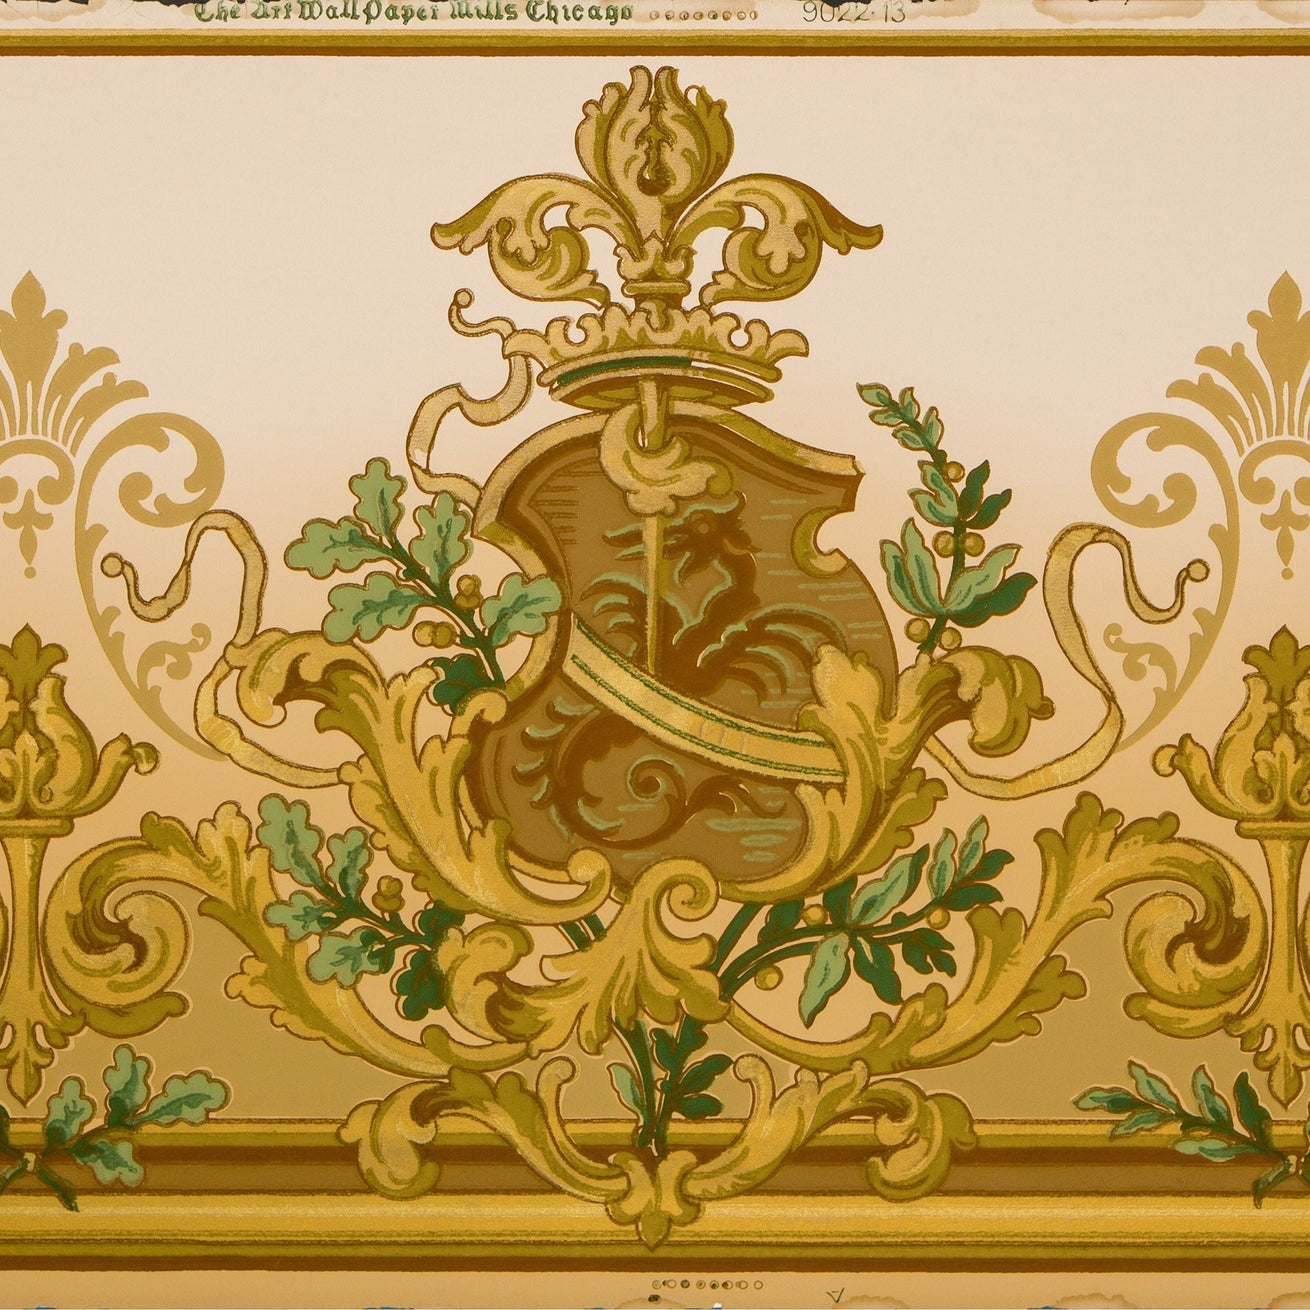 Heraldic Frieze with Shield and Leafy Scrolls - Antique Wallpaper Remnant